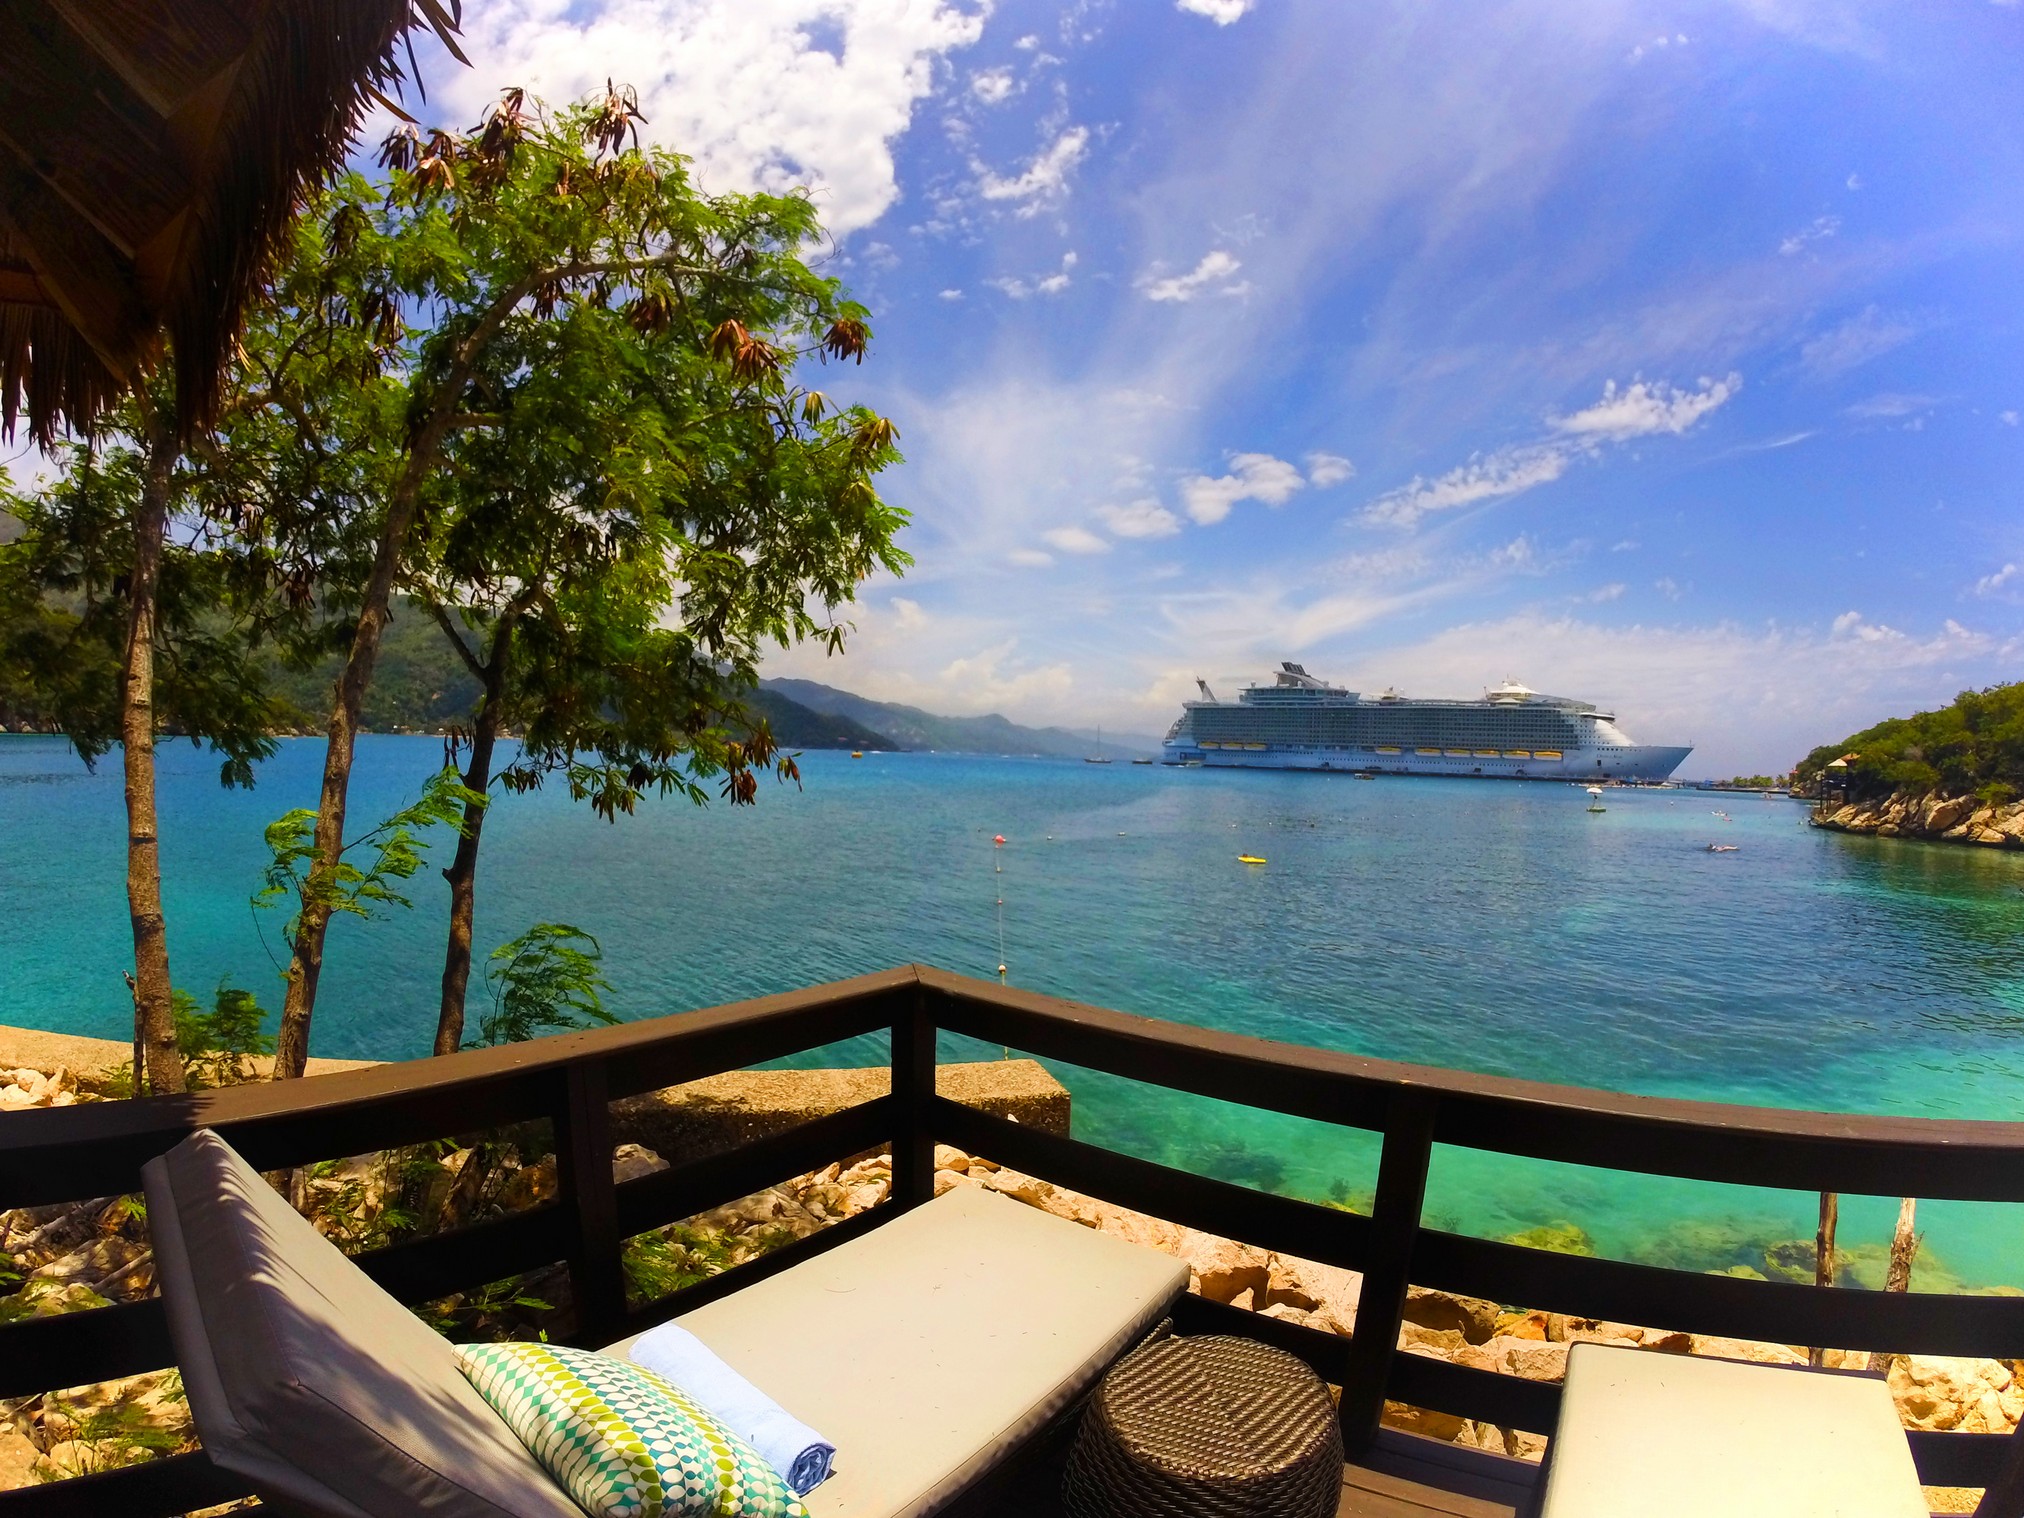 A day in Labadee, Haiti: adventure and relaxation